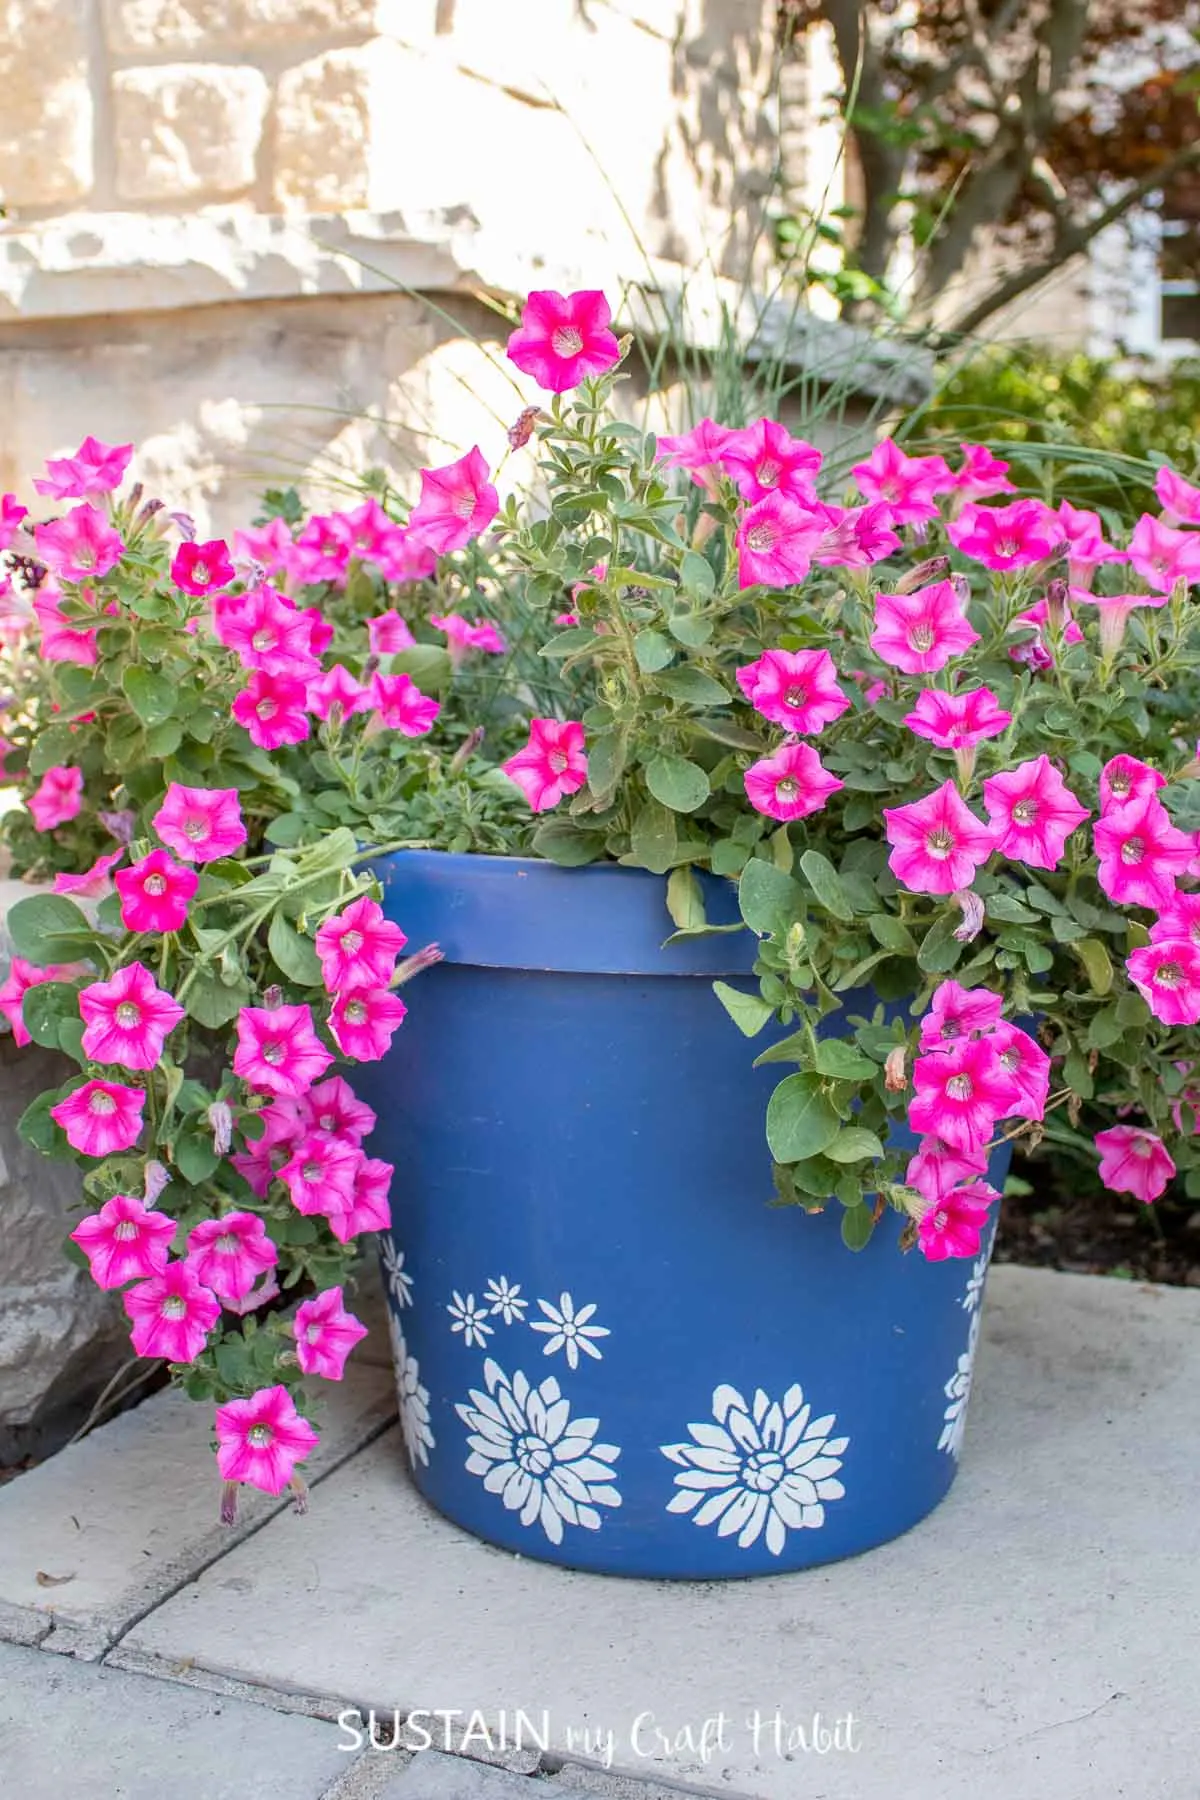 A bright blue planter with white stenciled flowers. They planter is overflowing with fresh pink flowers.